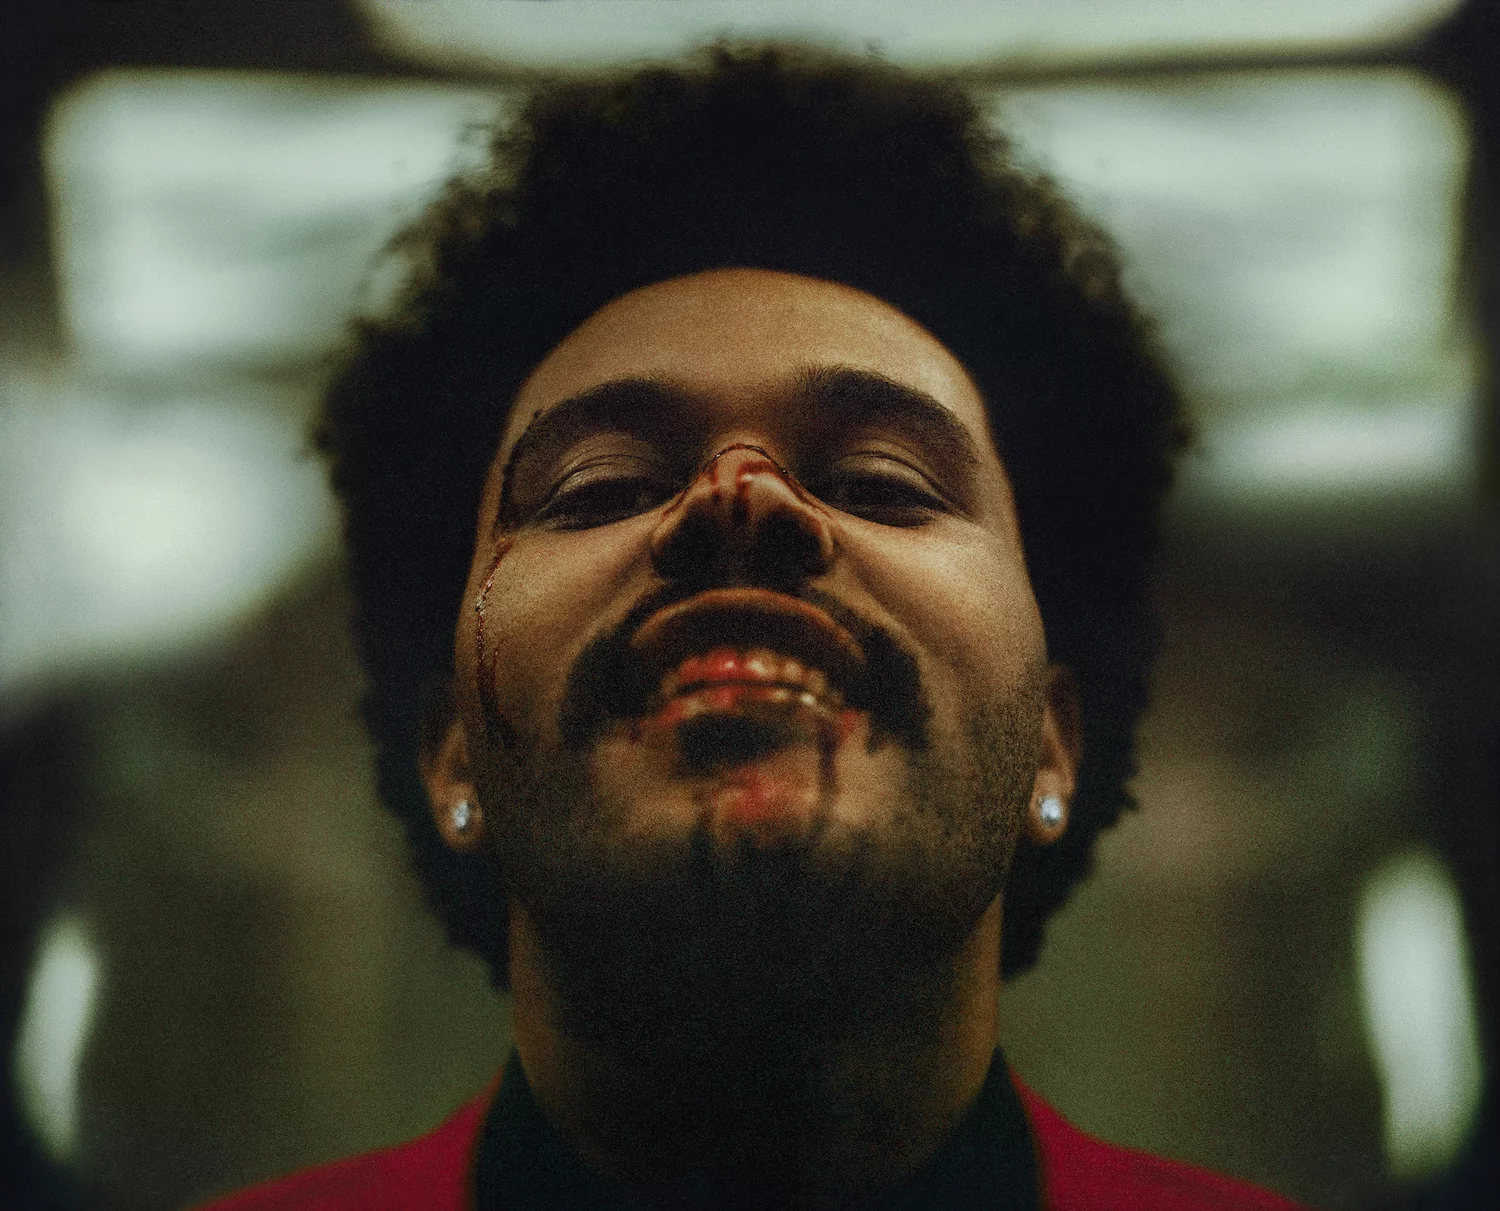 The Weeknd After Hours 1 by Anton TAMMI